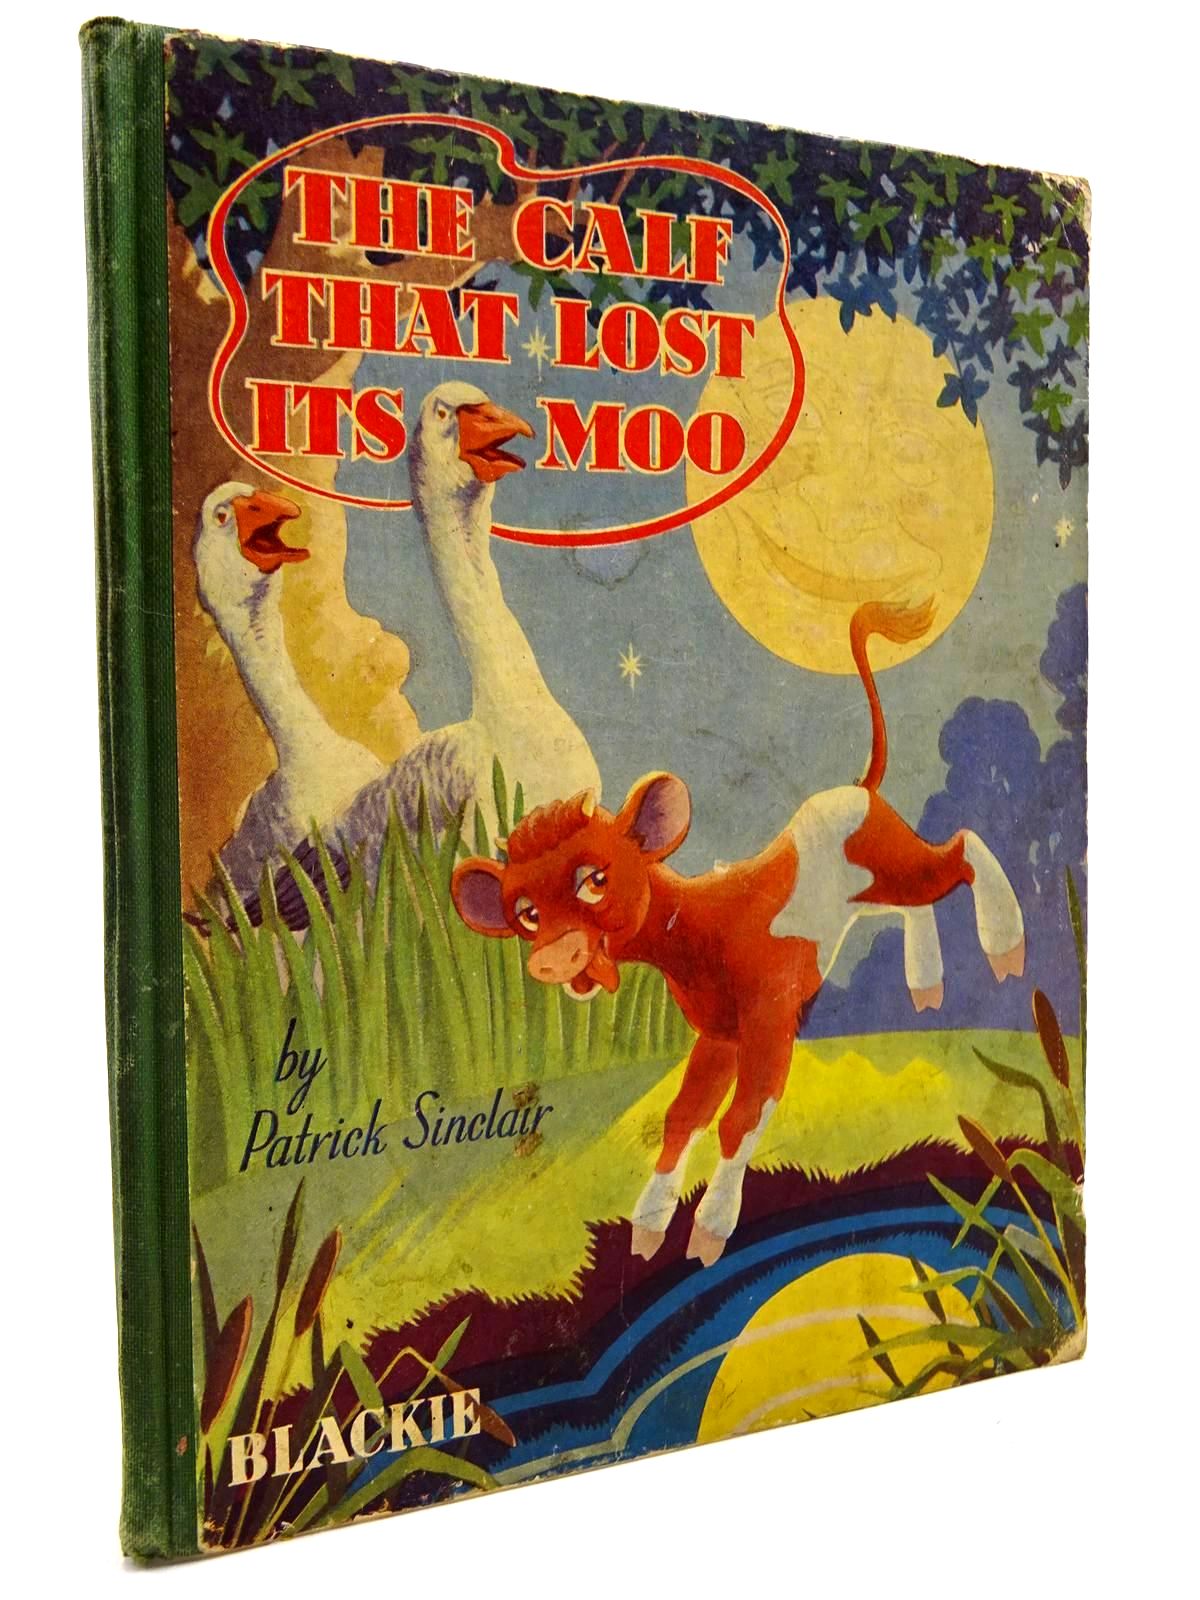 Photo of THE CALF THAT LOST ITS MOO written by Sinclair, Patrick illustrated by Sinclair, Patrick published by Blackie & Son Ltd. (STOCK CODE: 2131091)  for sale by Stella & Rose's Books